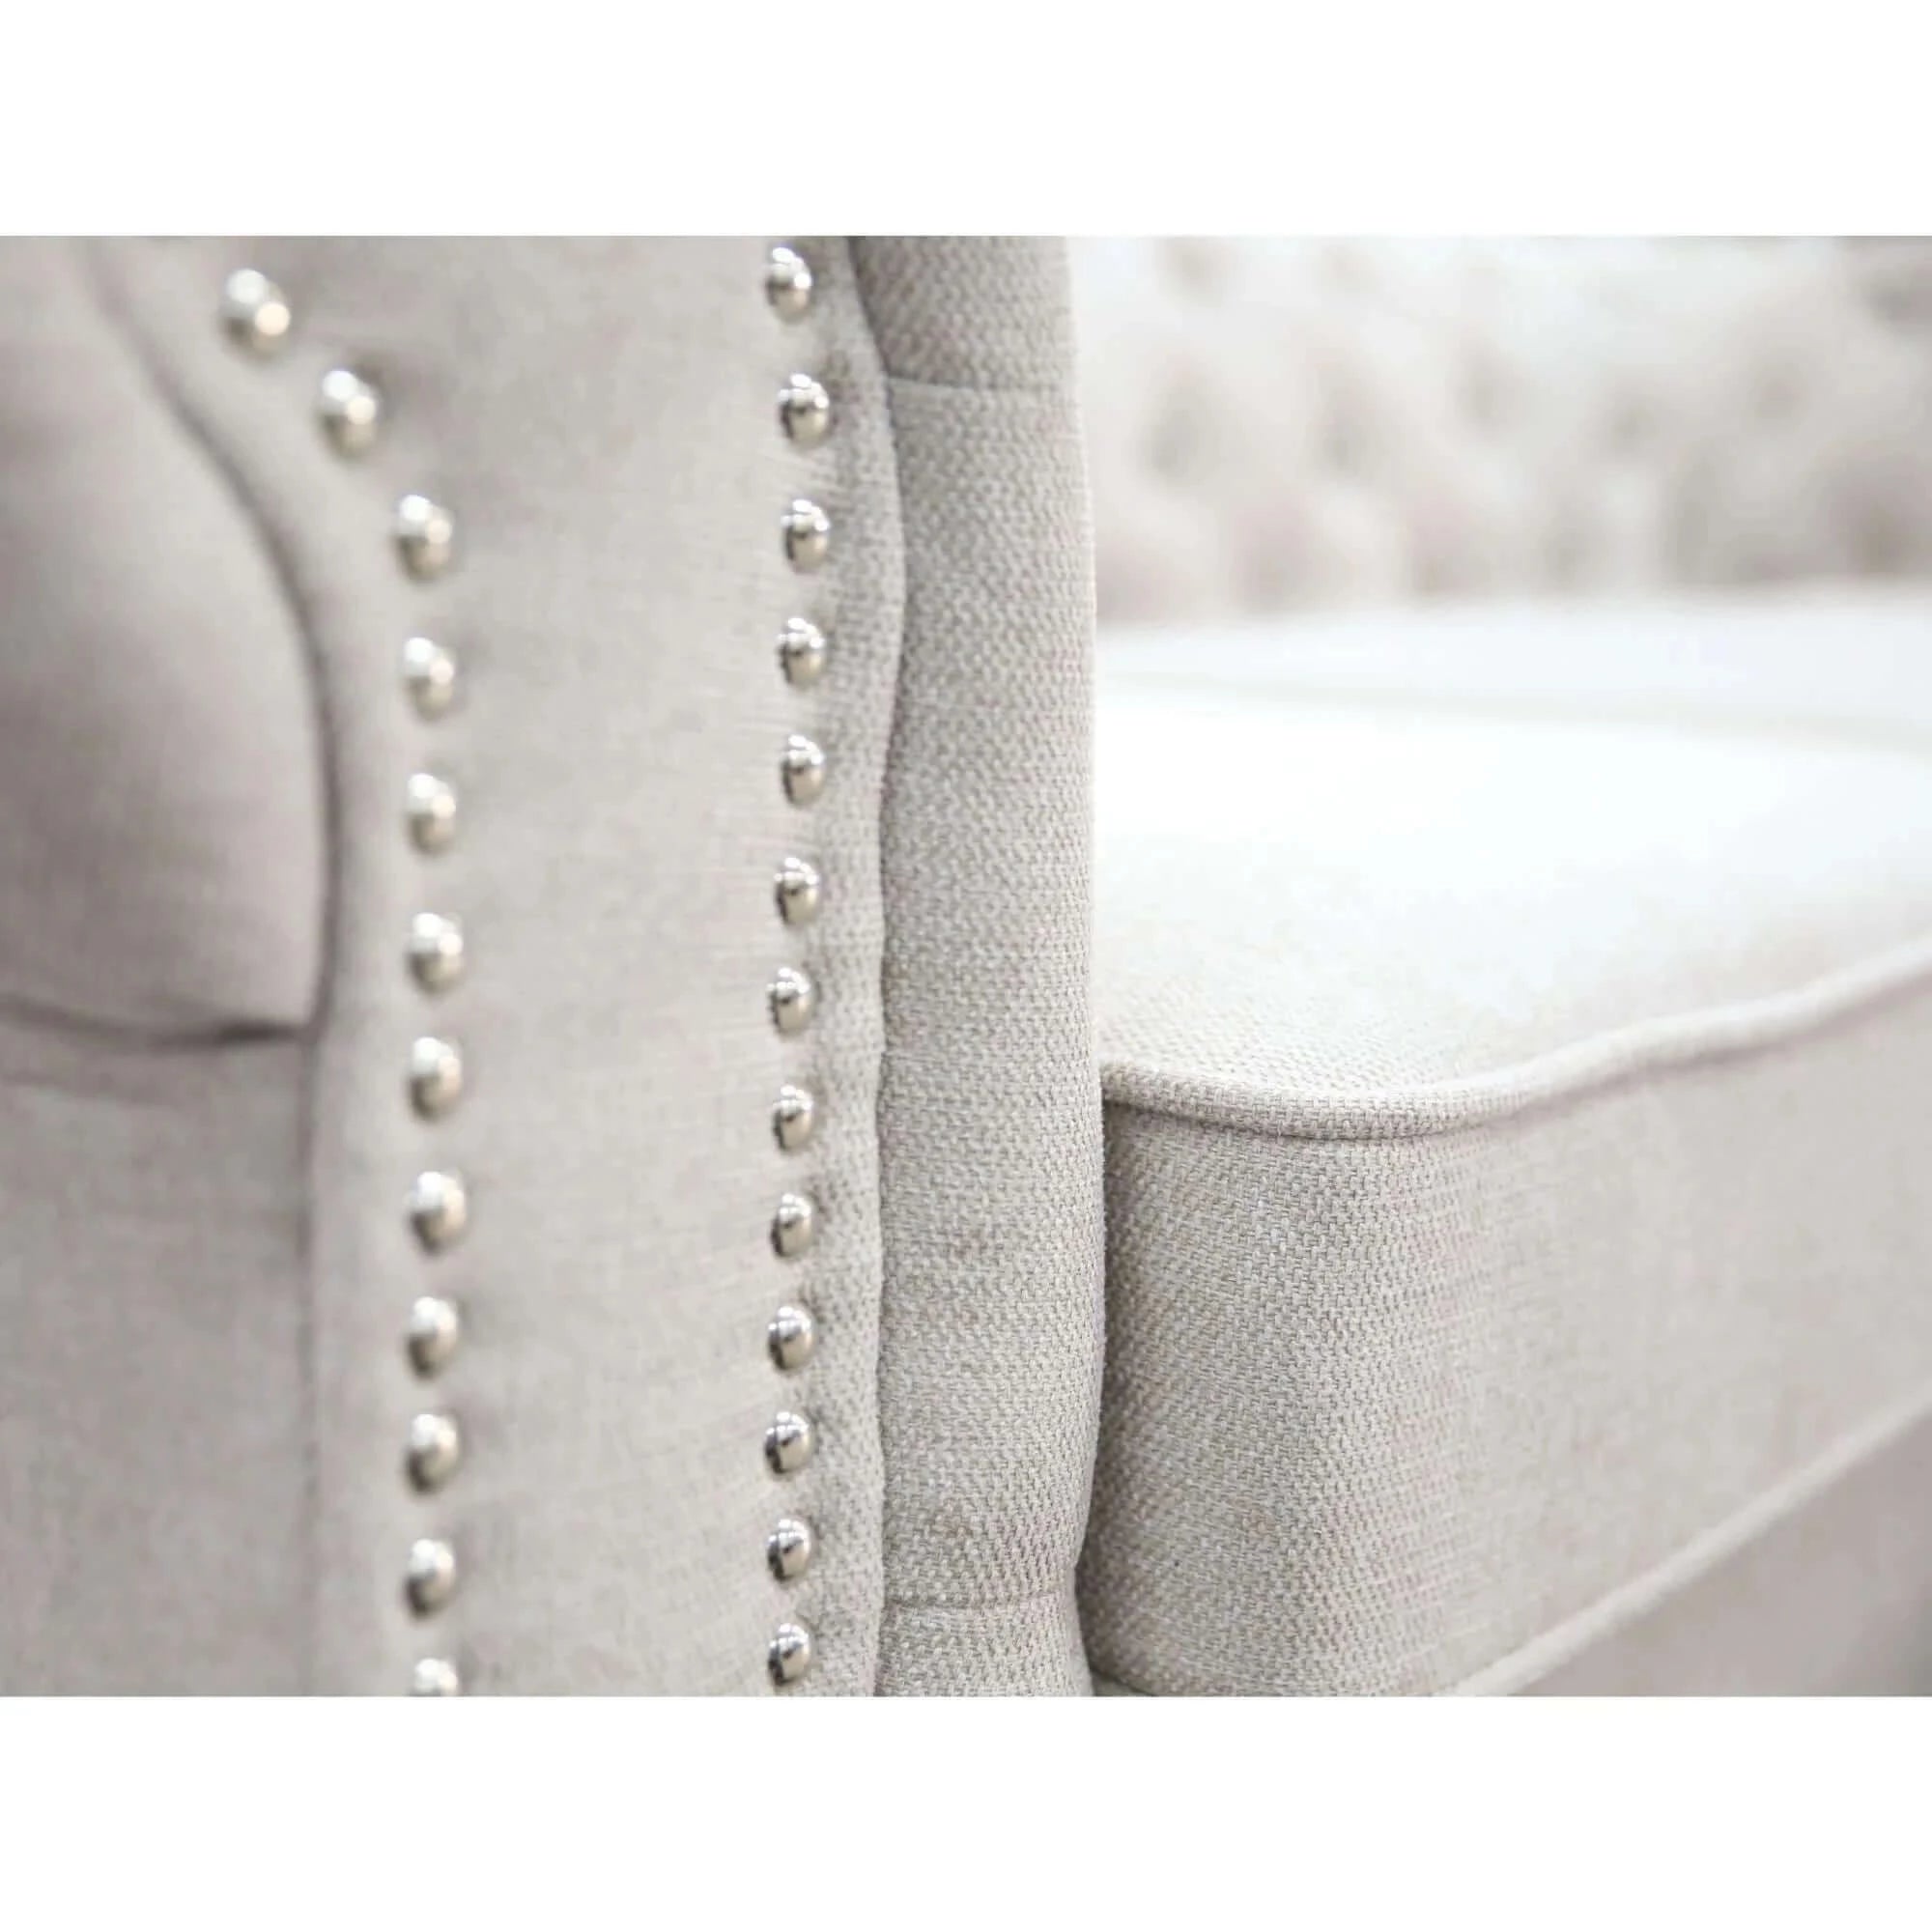 Buy mellowly 3 + 2 seater sofa fabric uplholstered chesterfield lounge couch - beige - upinteriors-Upinteriors